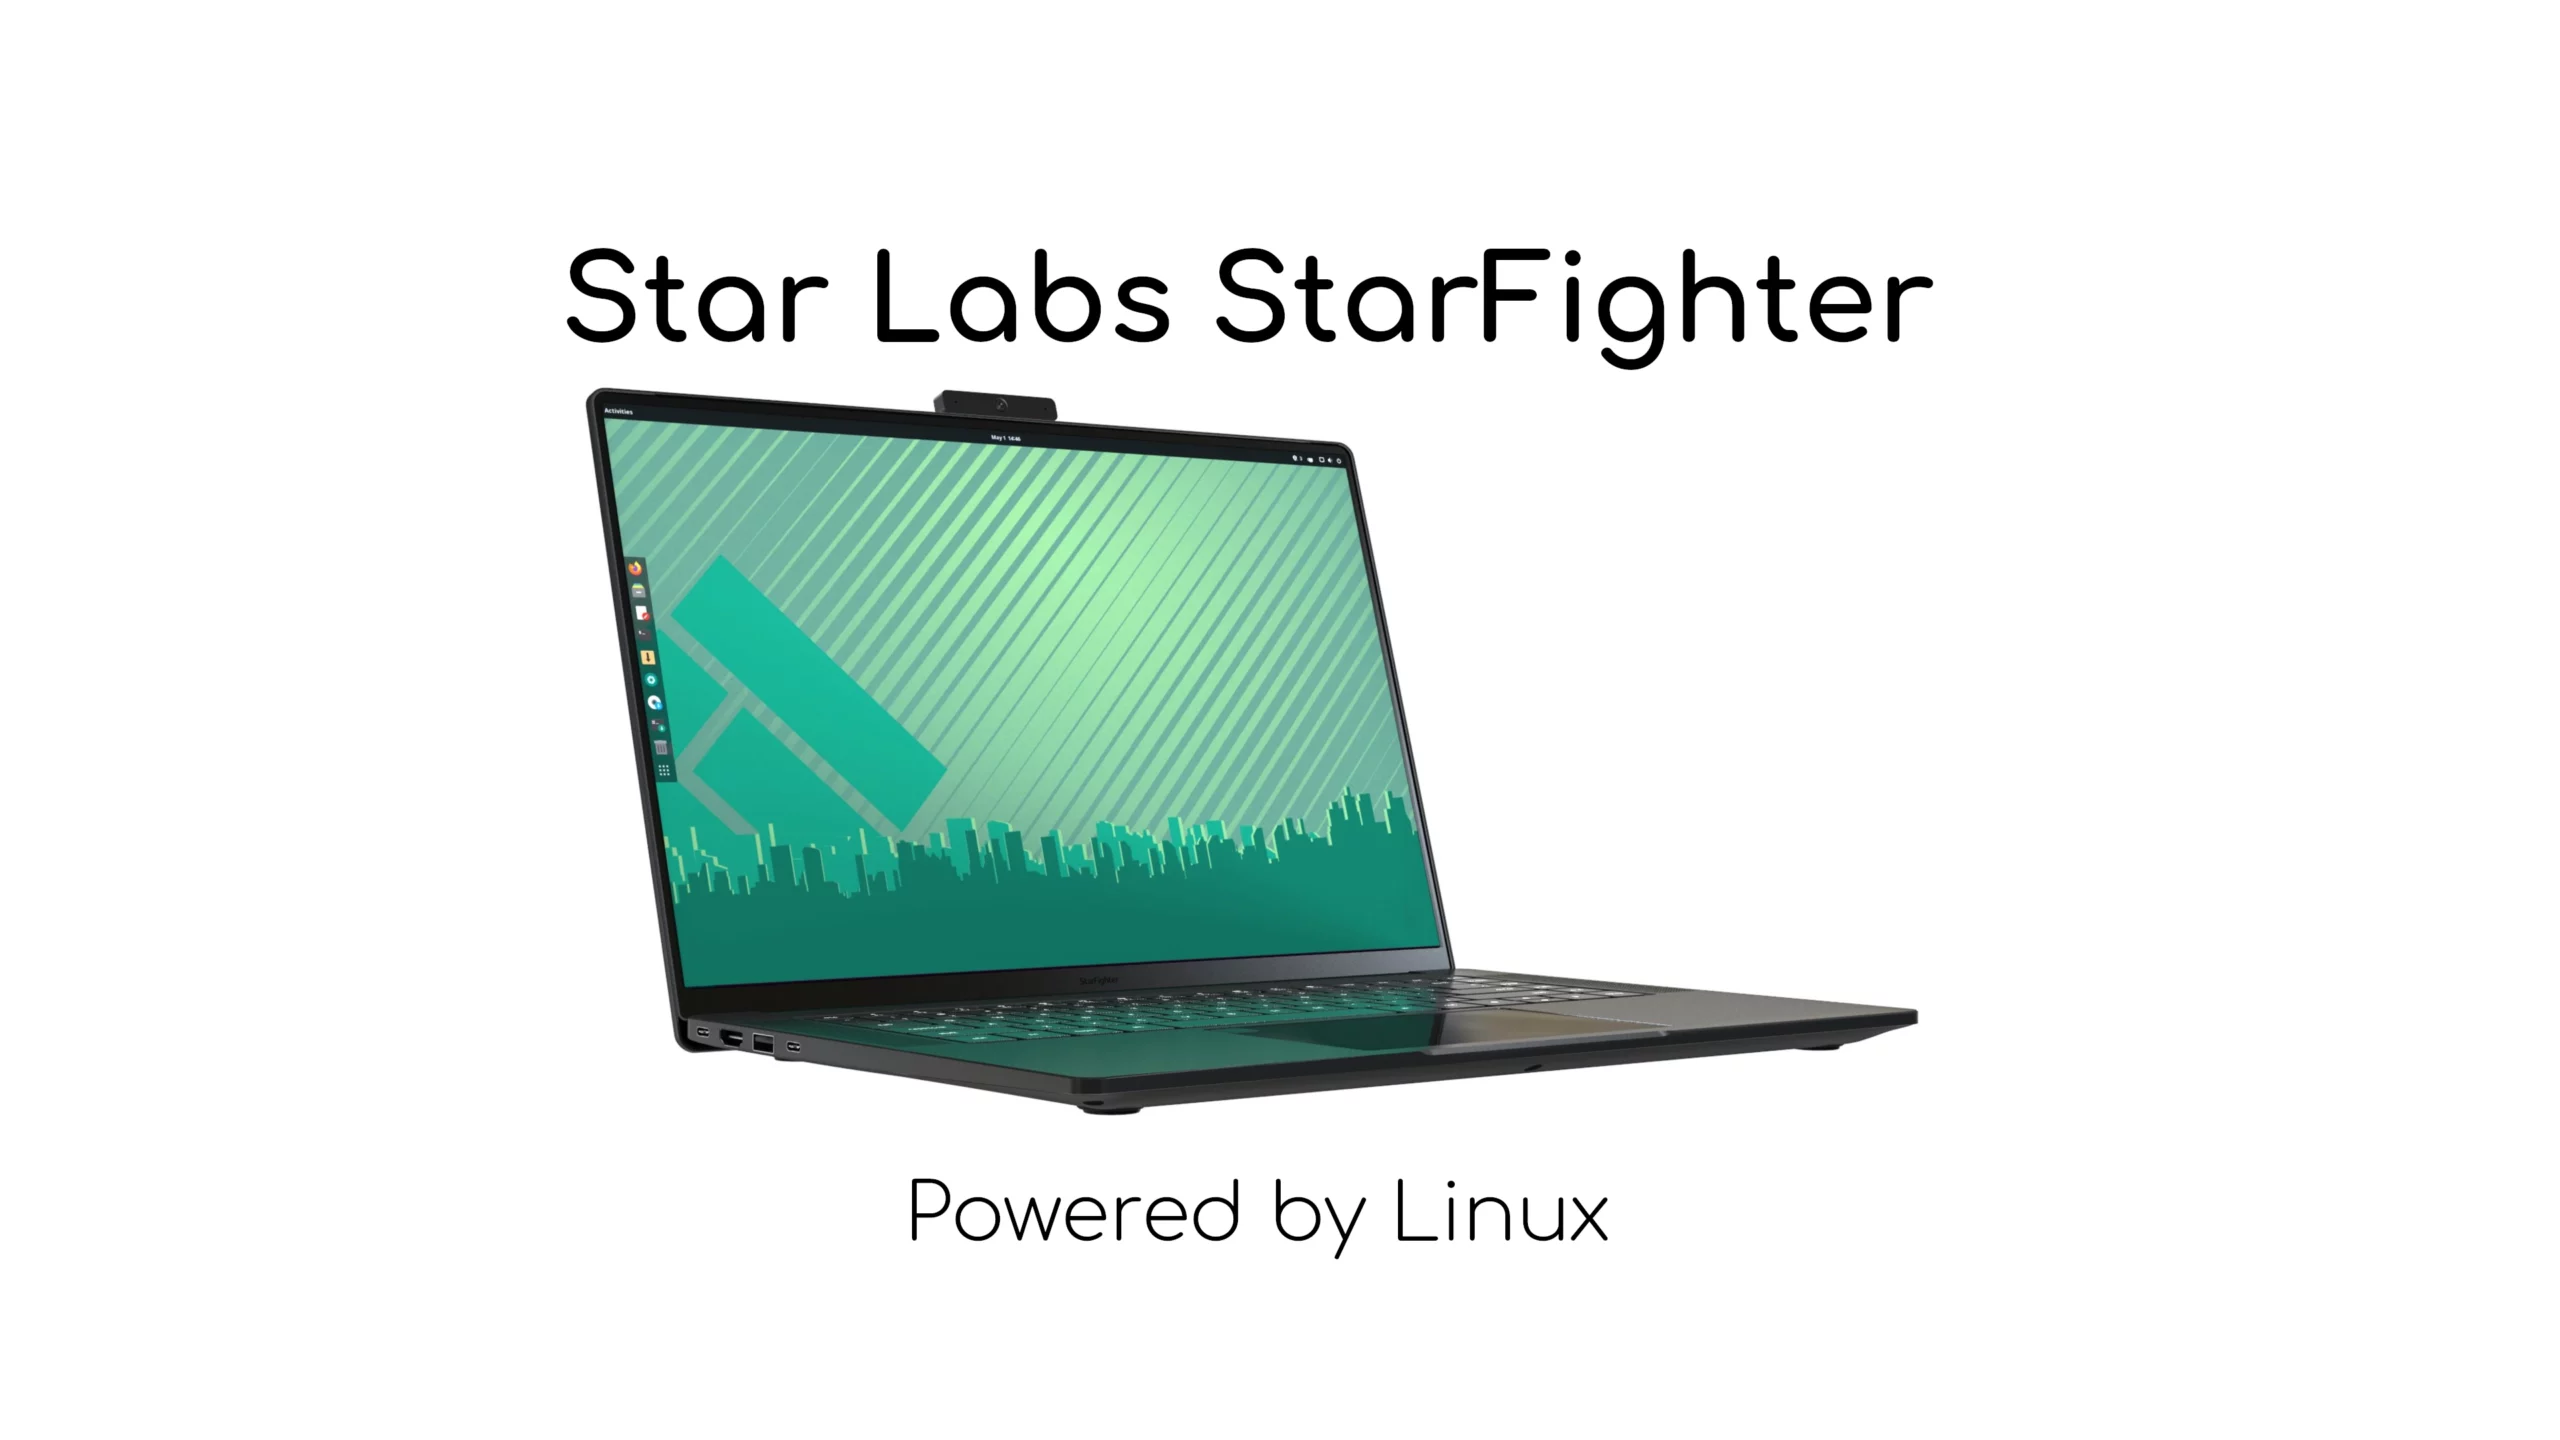 You Can Now Buy the StarFighter 4K Linux Laptop from Star Labs